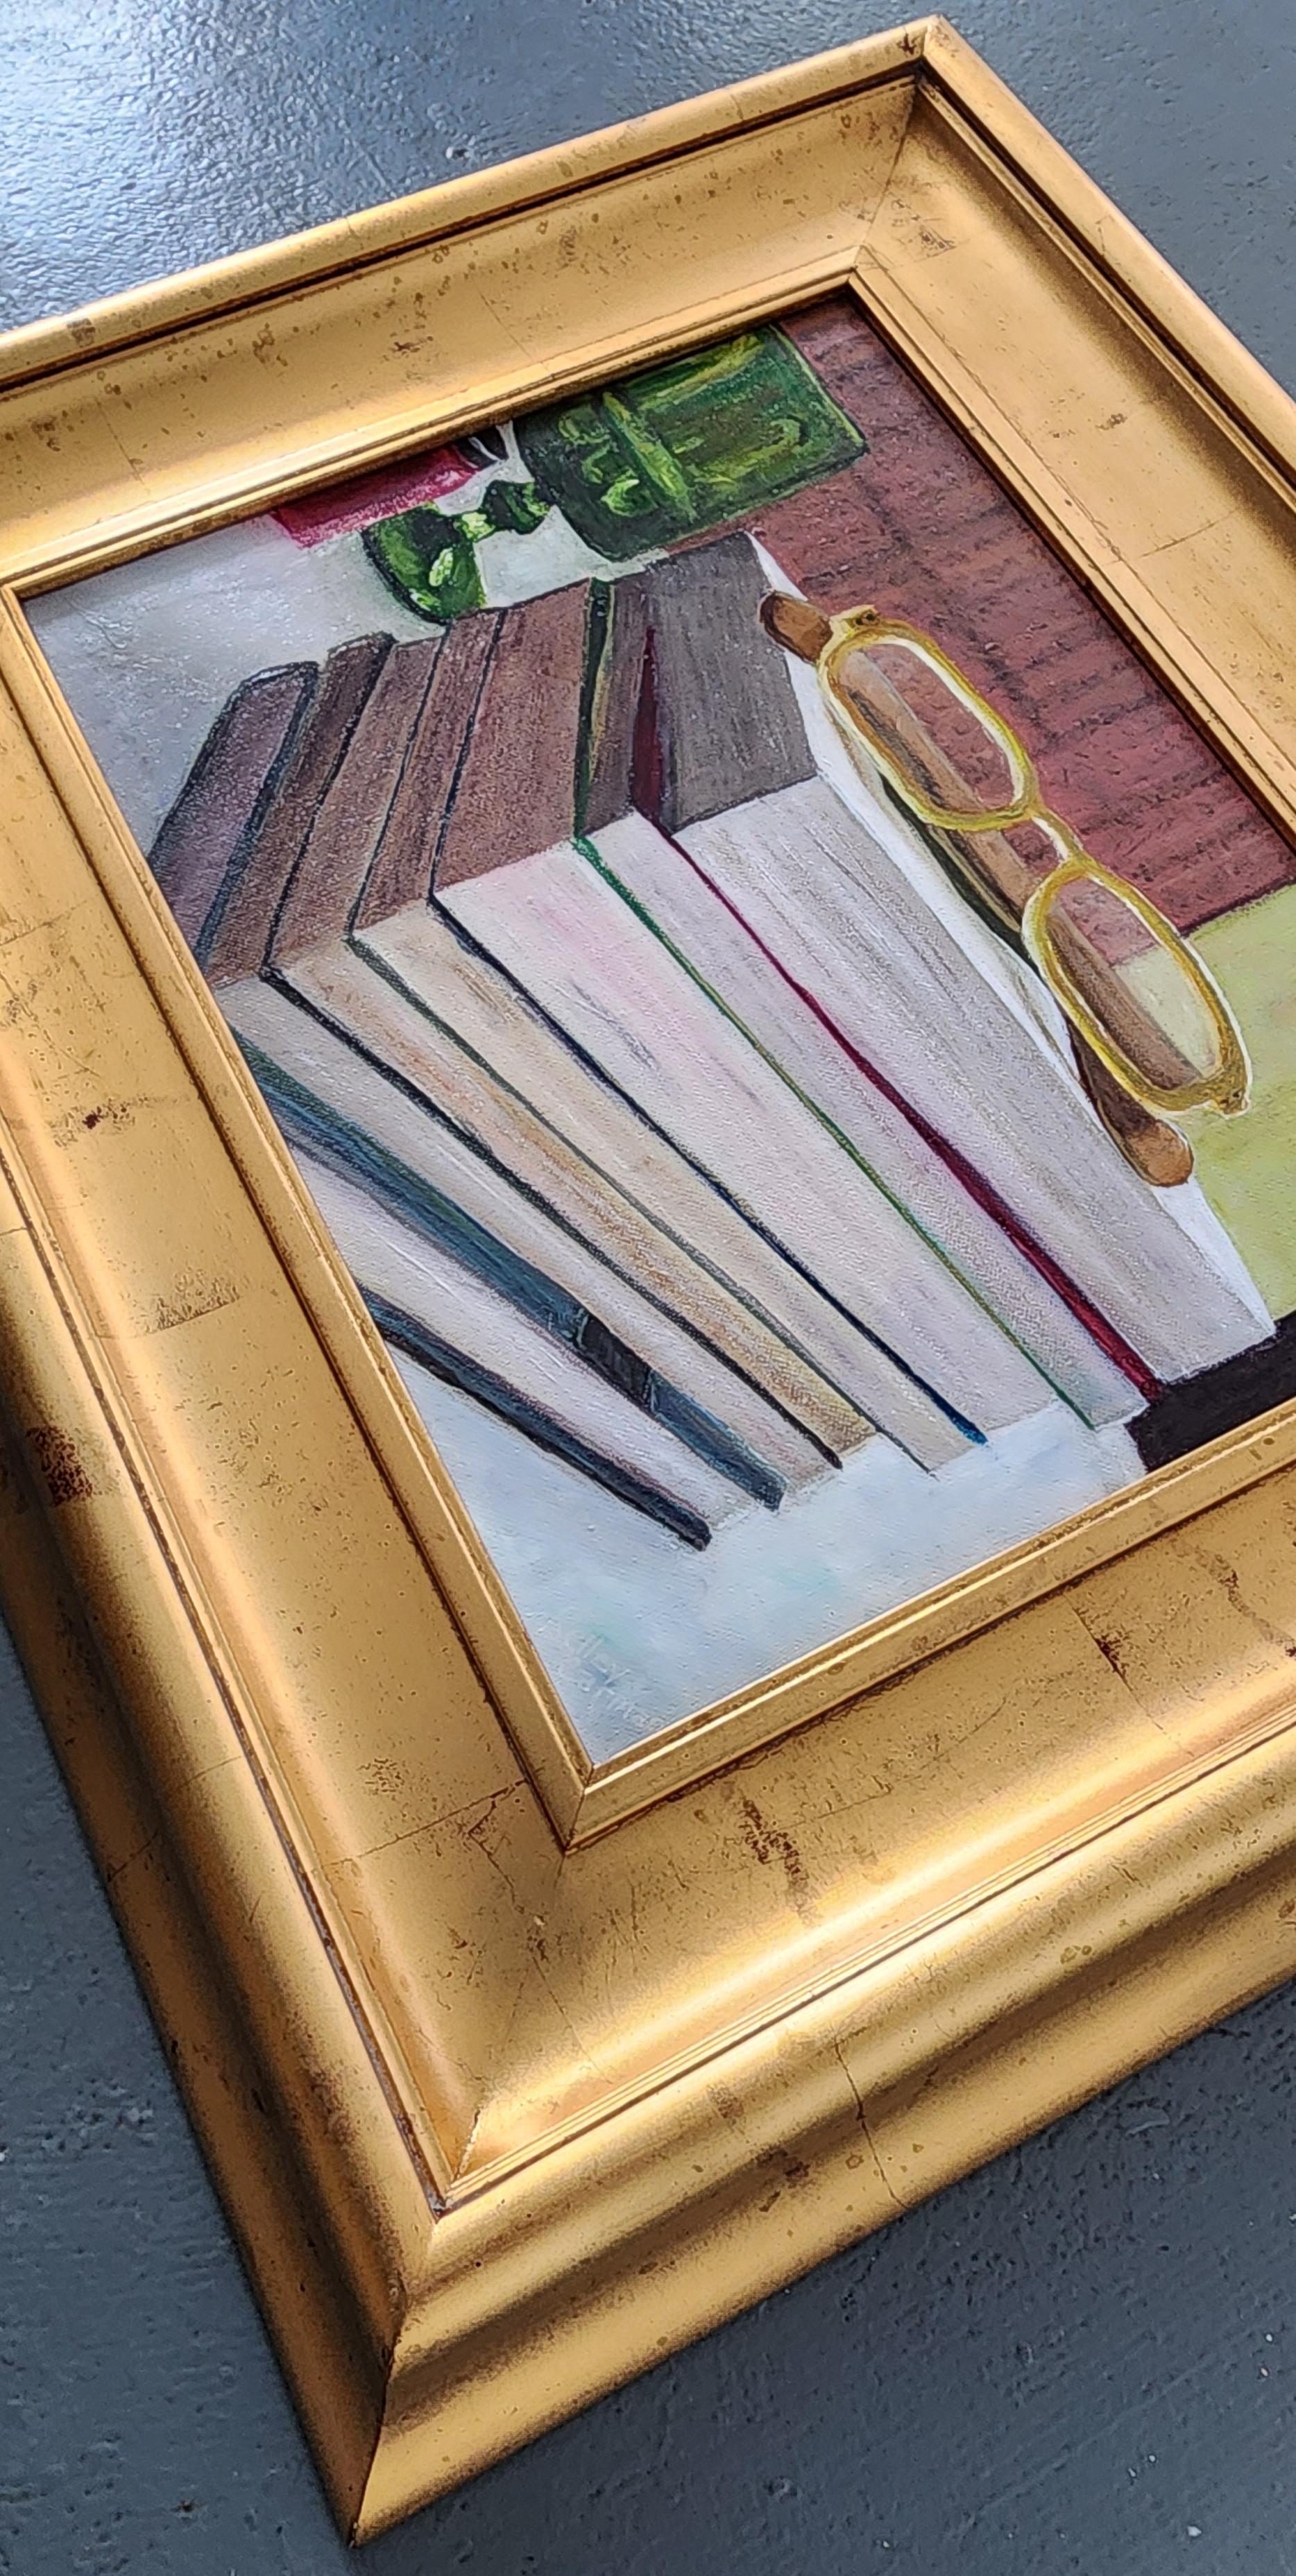 Backlog (Still Life, Books, Reading, Hobby, Warm, ~25% OFF LIST PRICE) - Painting by Kelley Carman